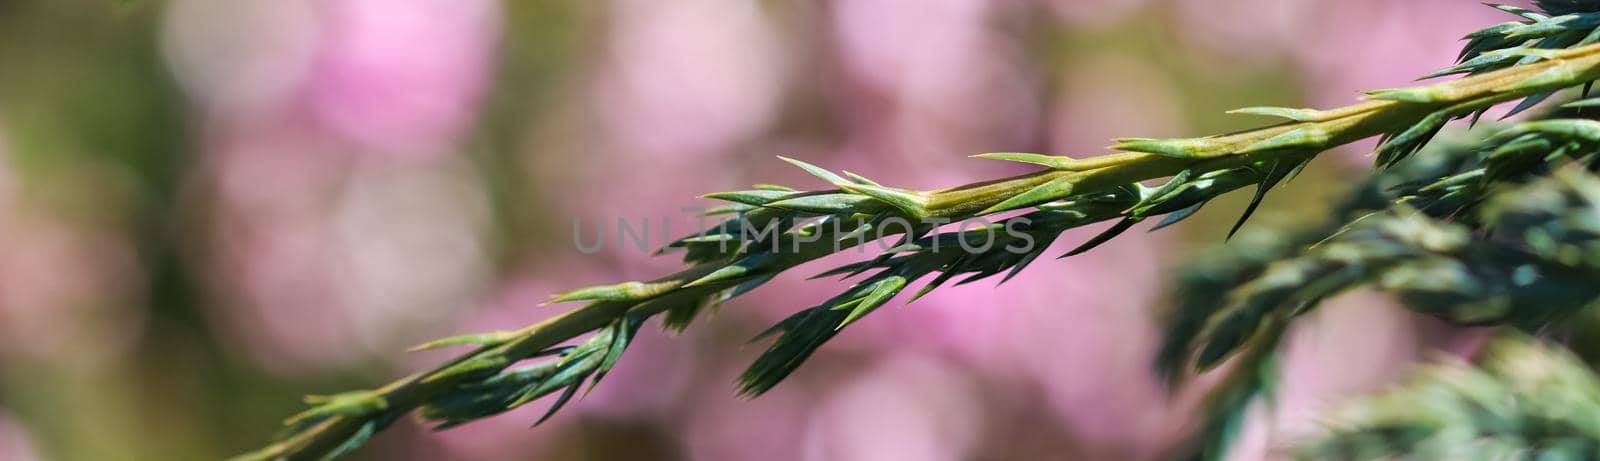 Blue evergreen conifer branches of Juniperus squamata Blue Carpet on a blurred background of pink flowers in the garden by Olayola